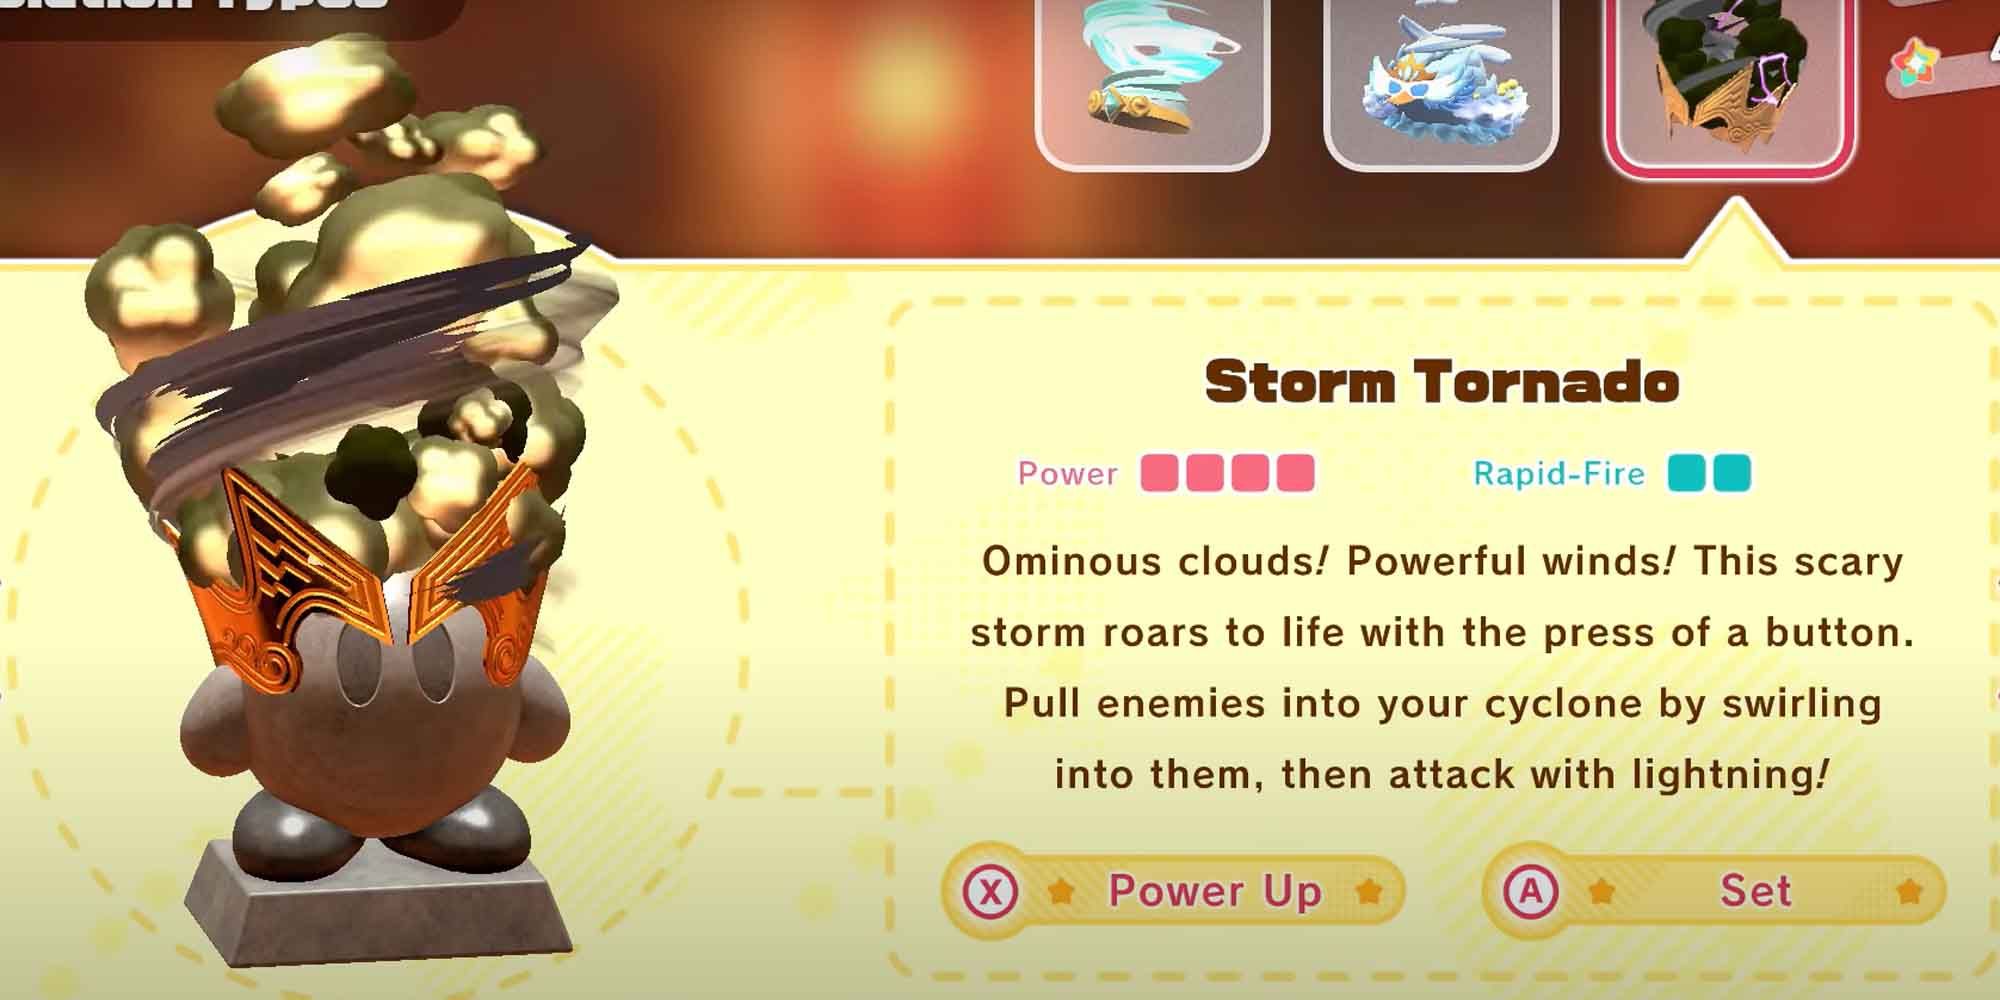 The Storm Tornado upgrade for the Tornado copy ability in Kirby and the Forgotten Land